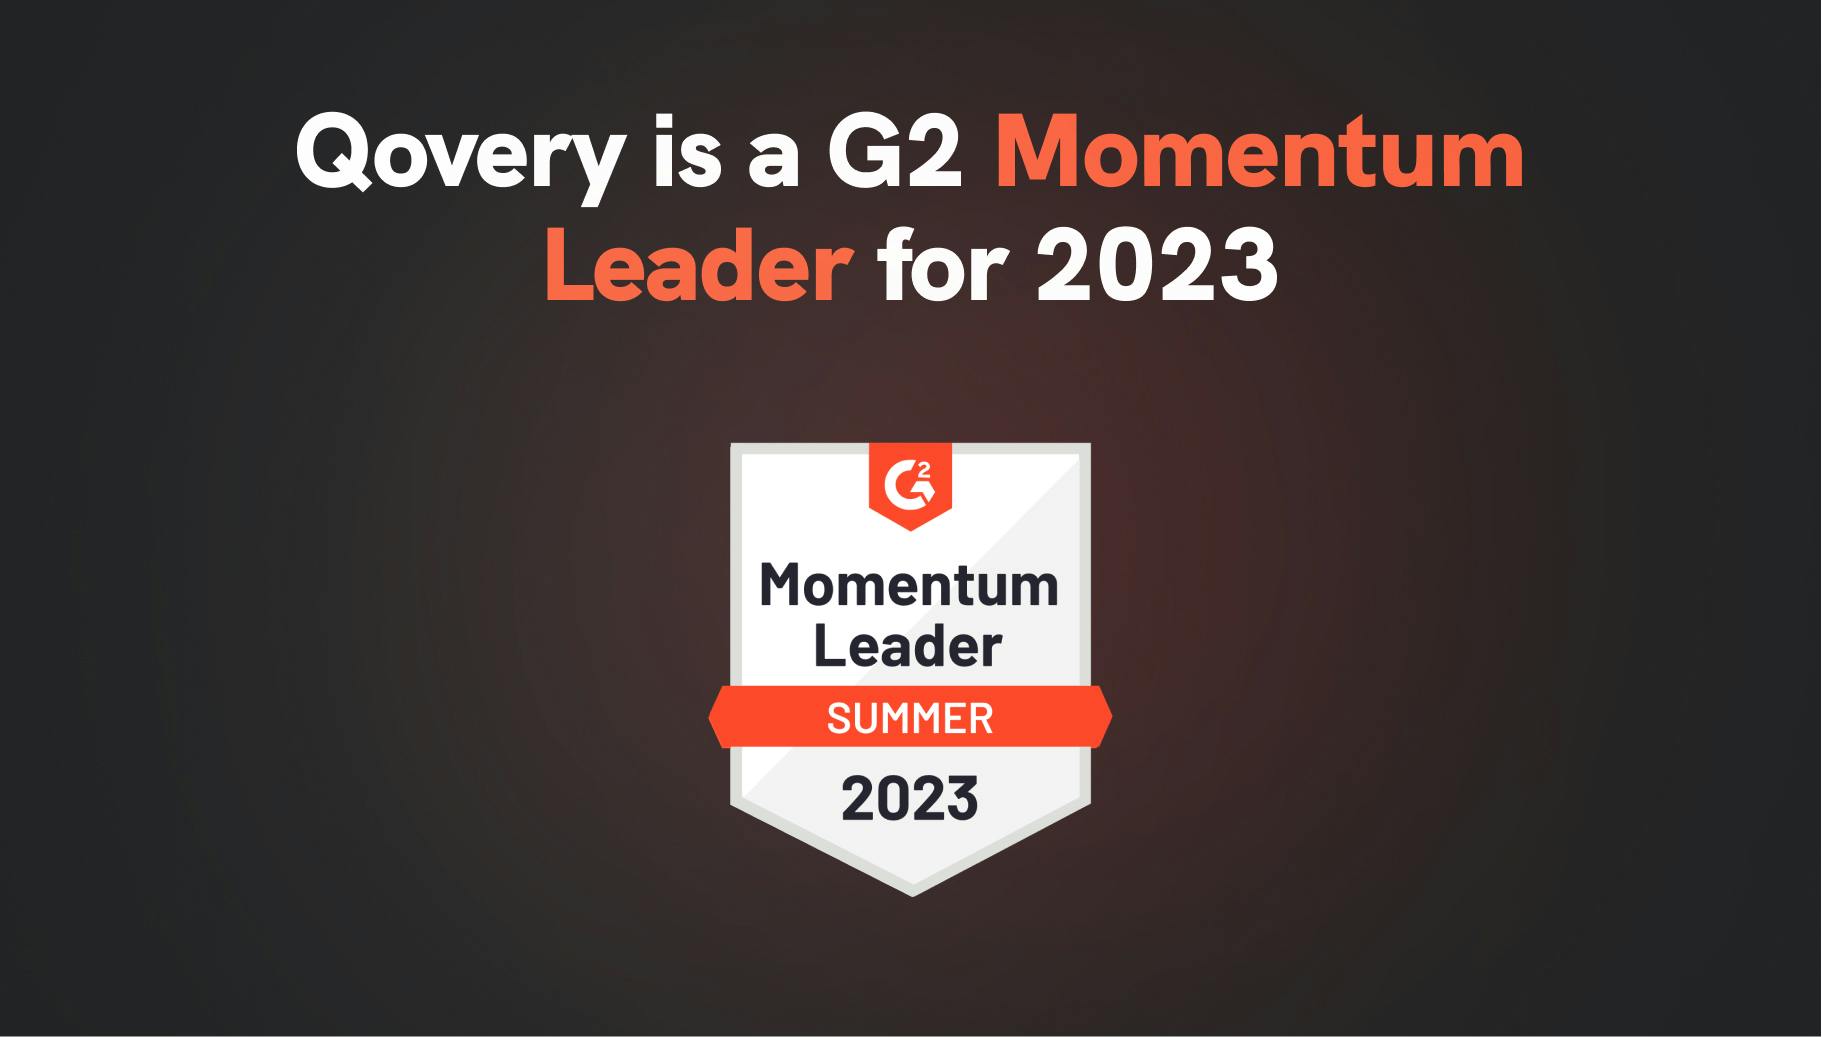 Qovery is a G2 Momentum Leader for 2023 - Qovery